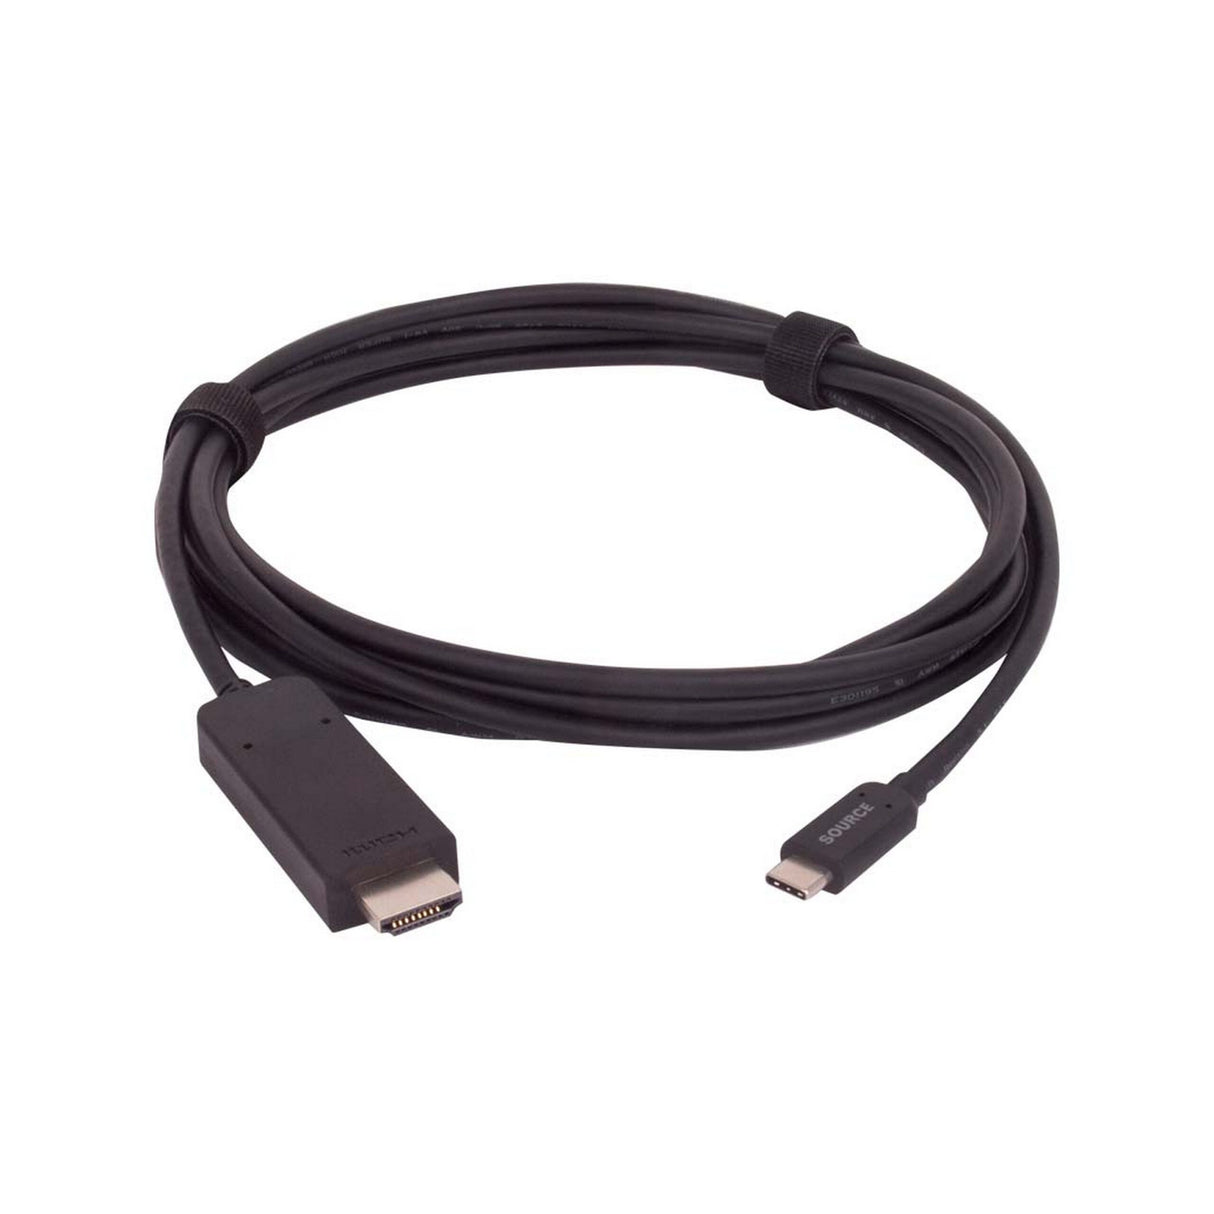 Liberty E-UCM-HDM-06F USB C Male to HDMI A Male Cable, 6 Foot